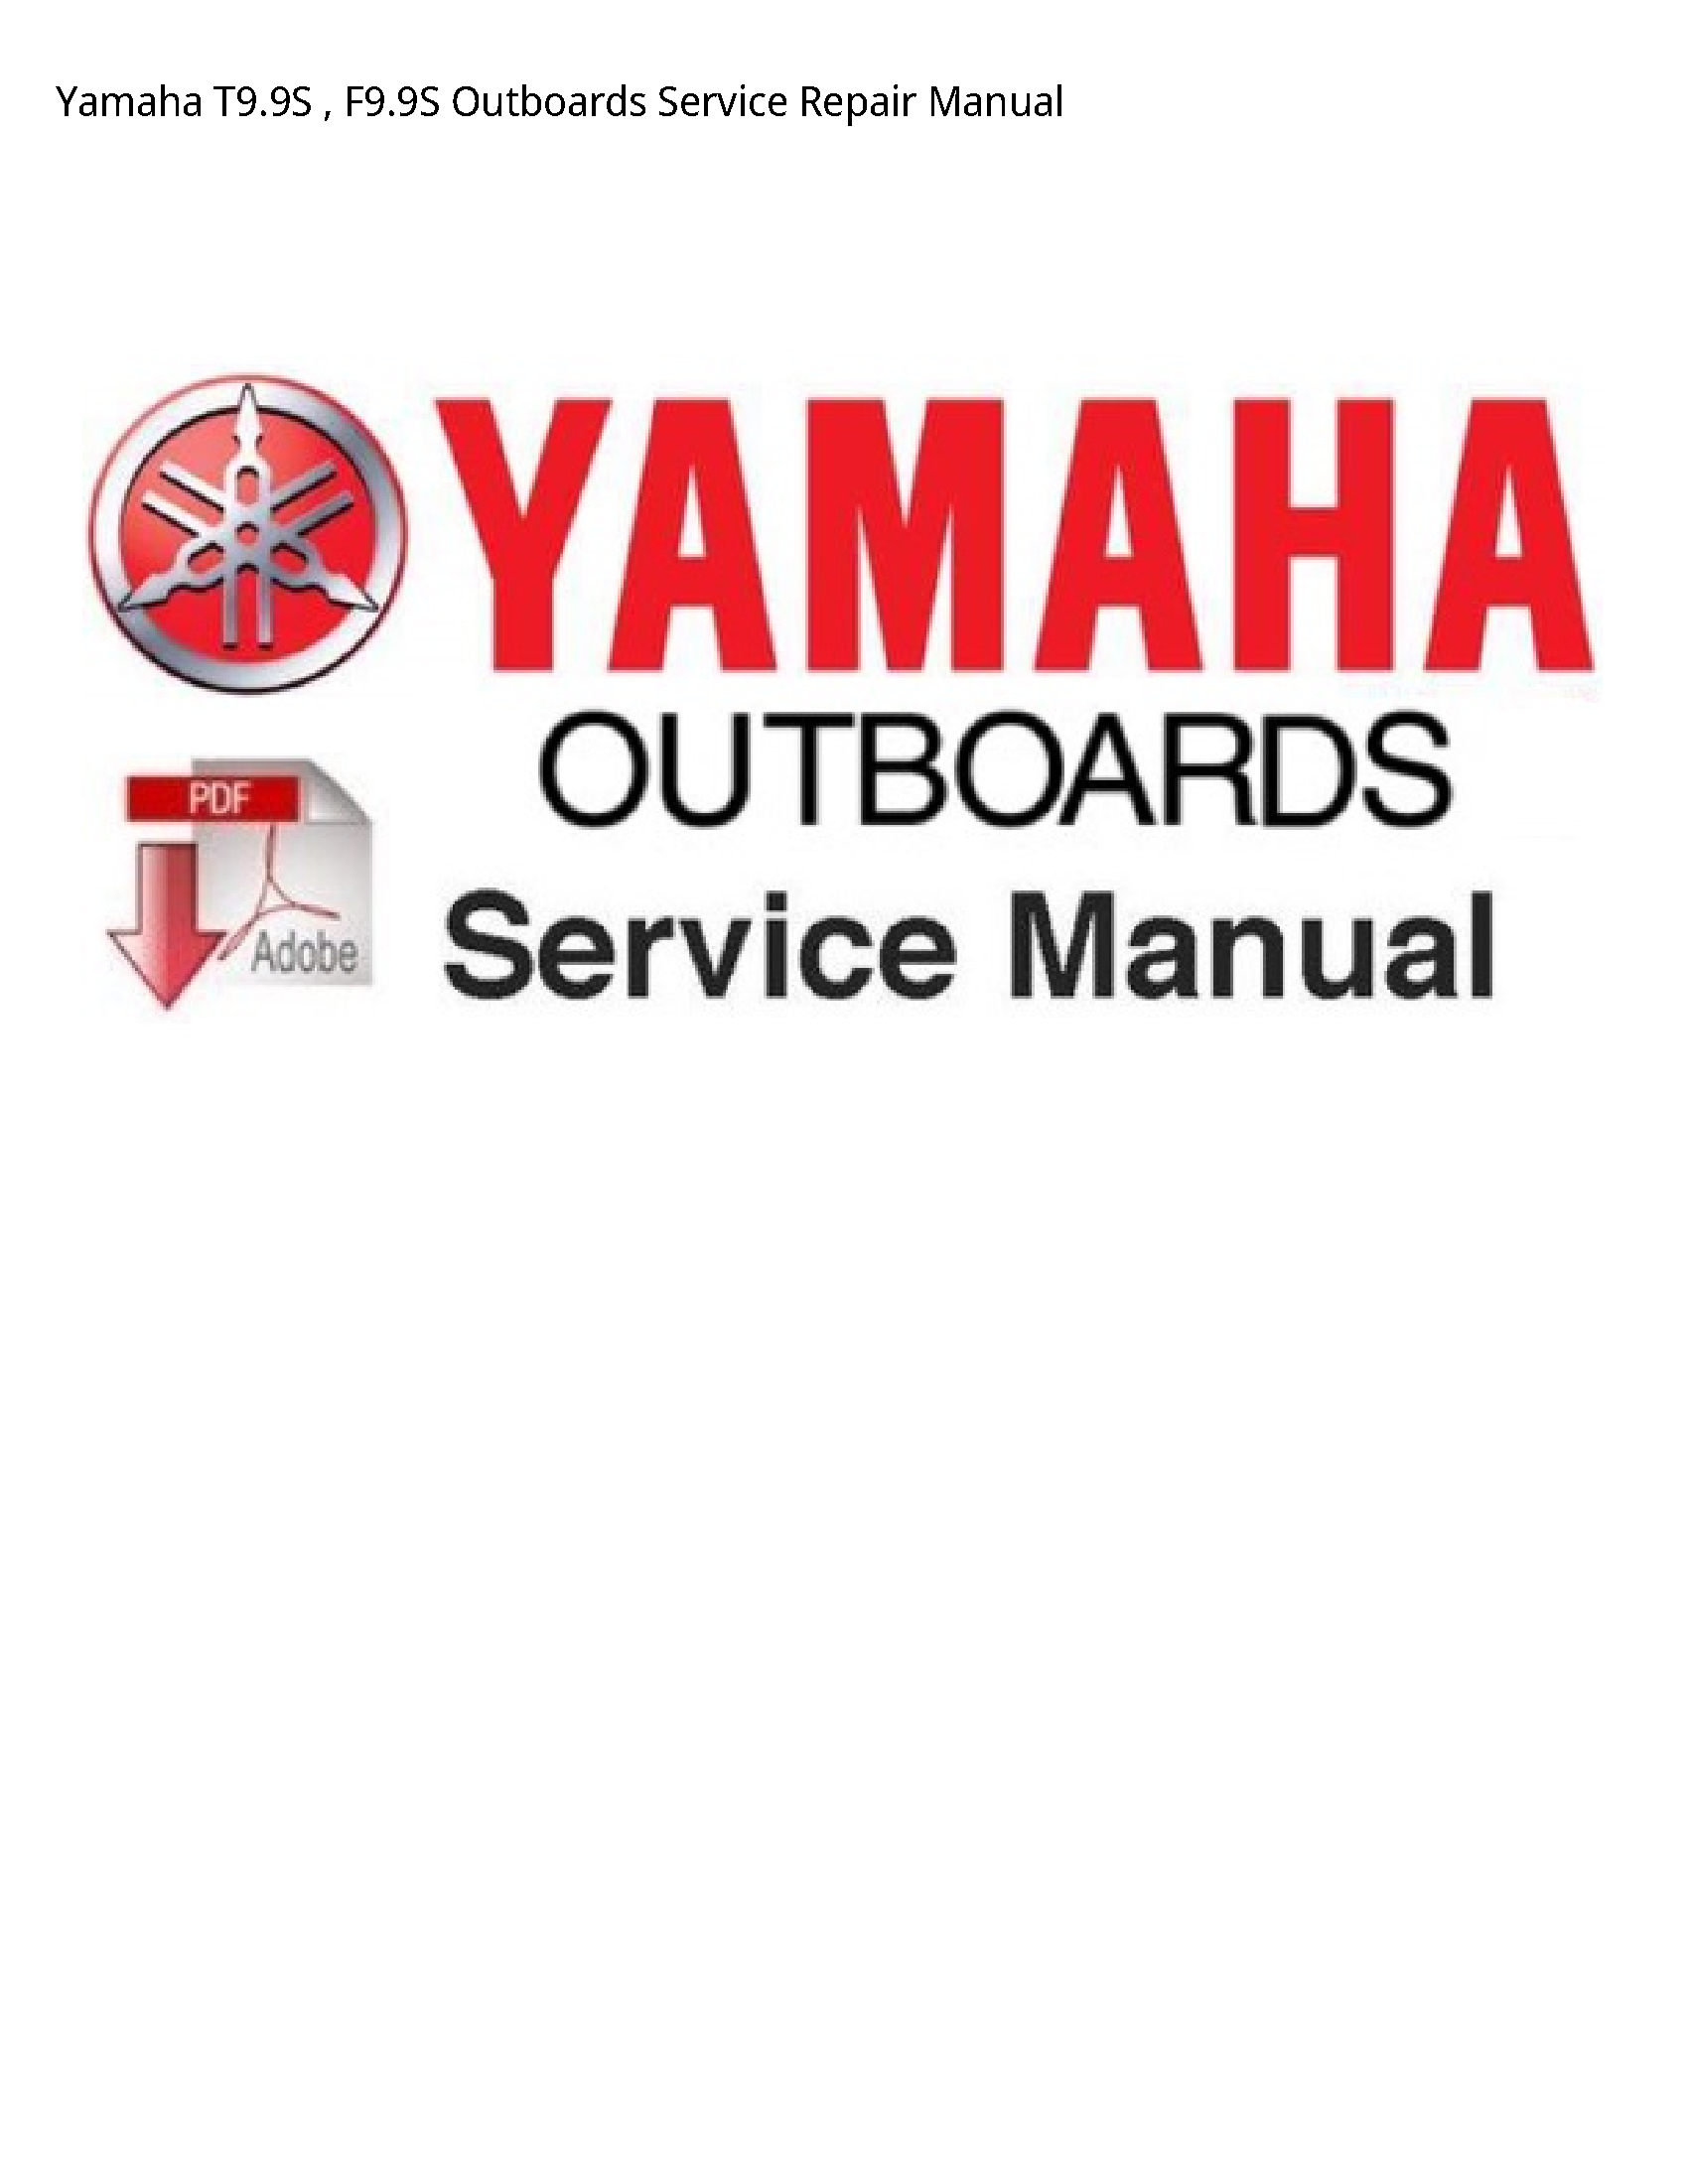 Yamaha T9.9S Outboards manual